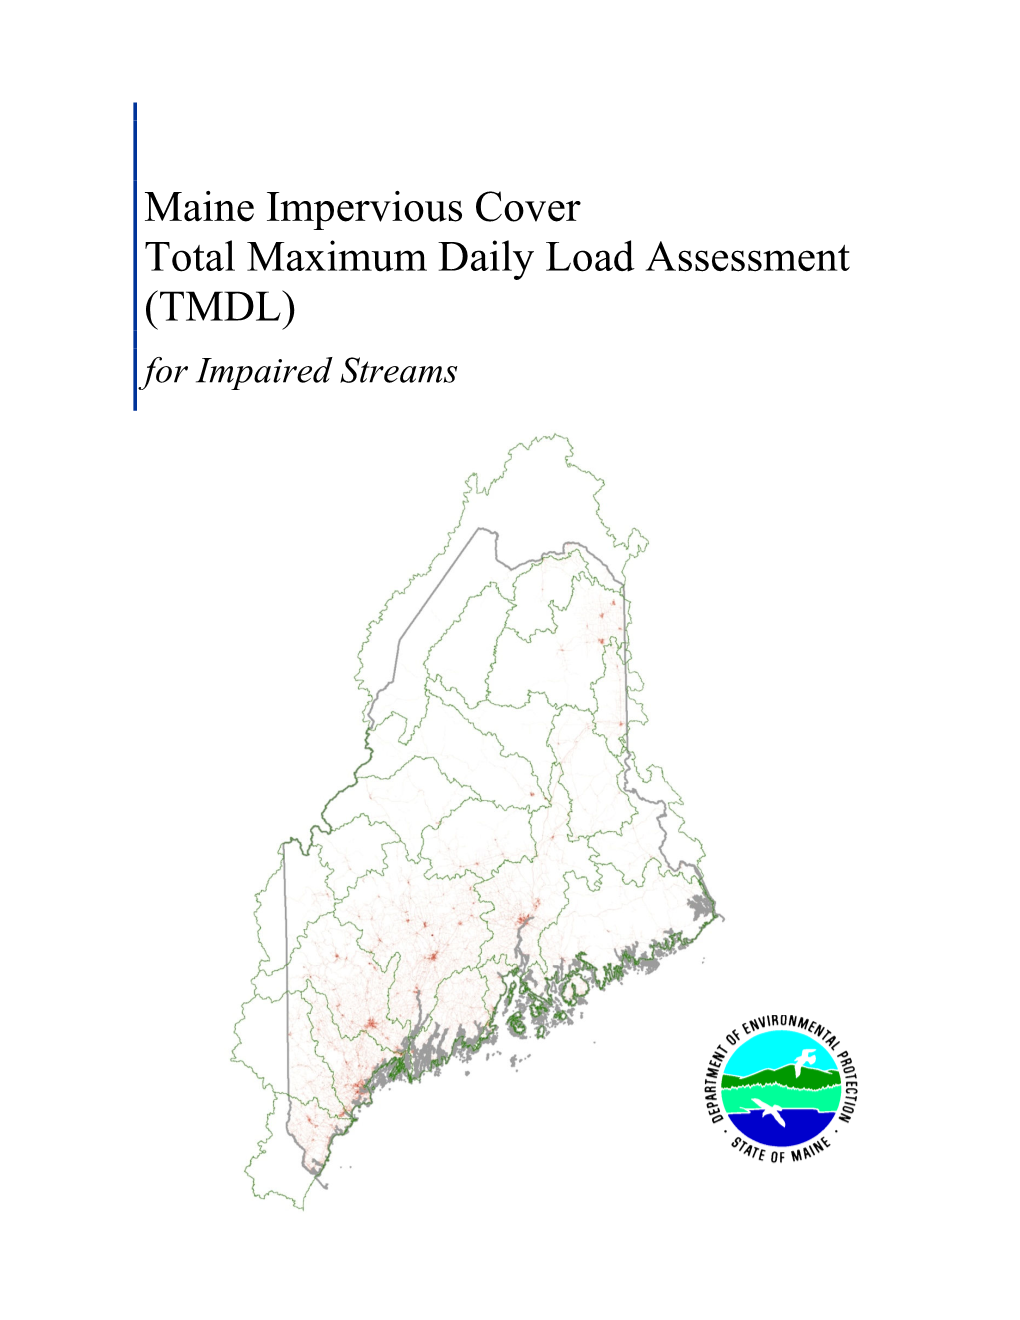 Maine Impervious Cover Total Maximum Daily Load Assessment